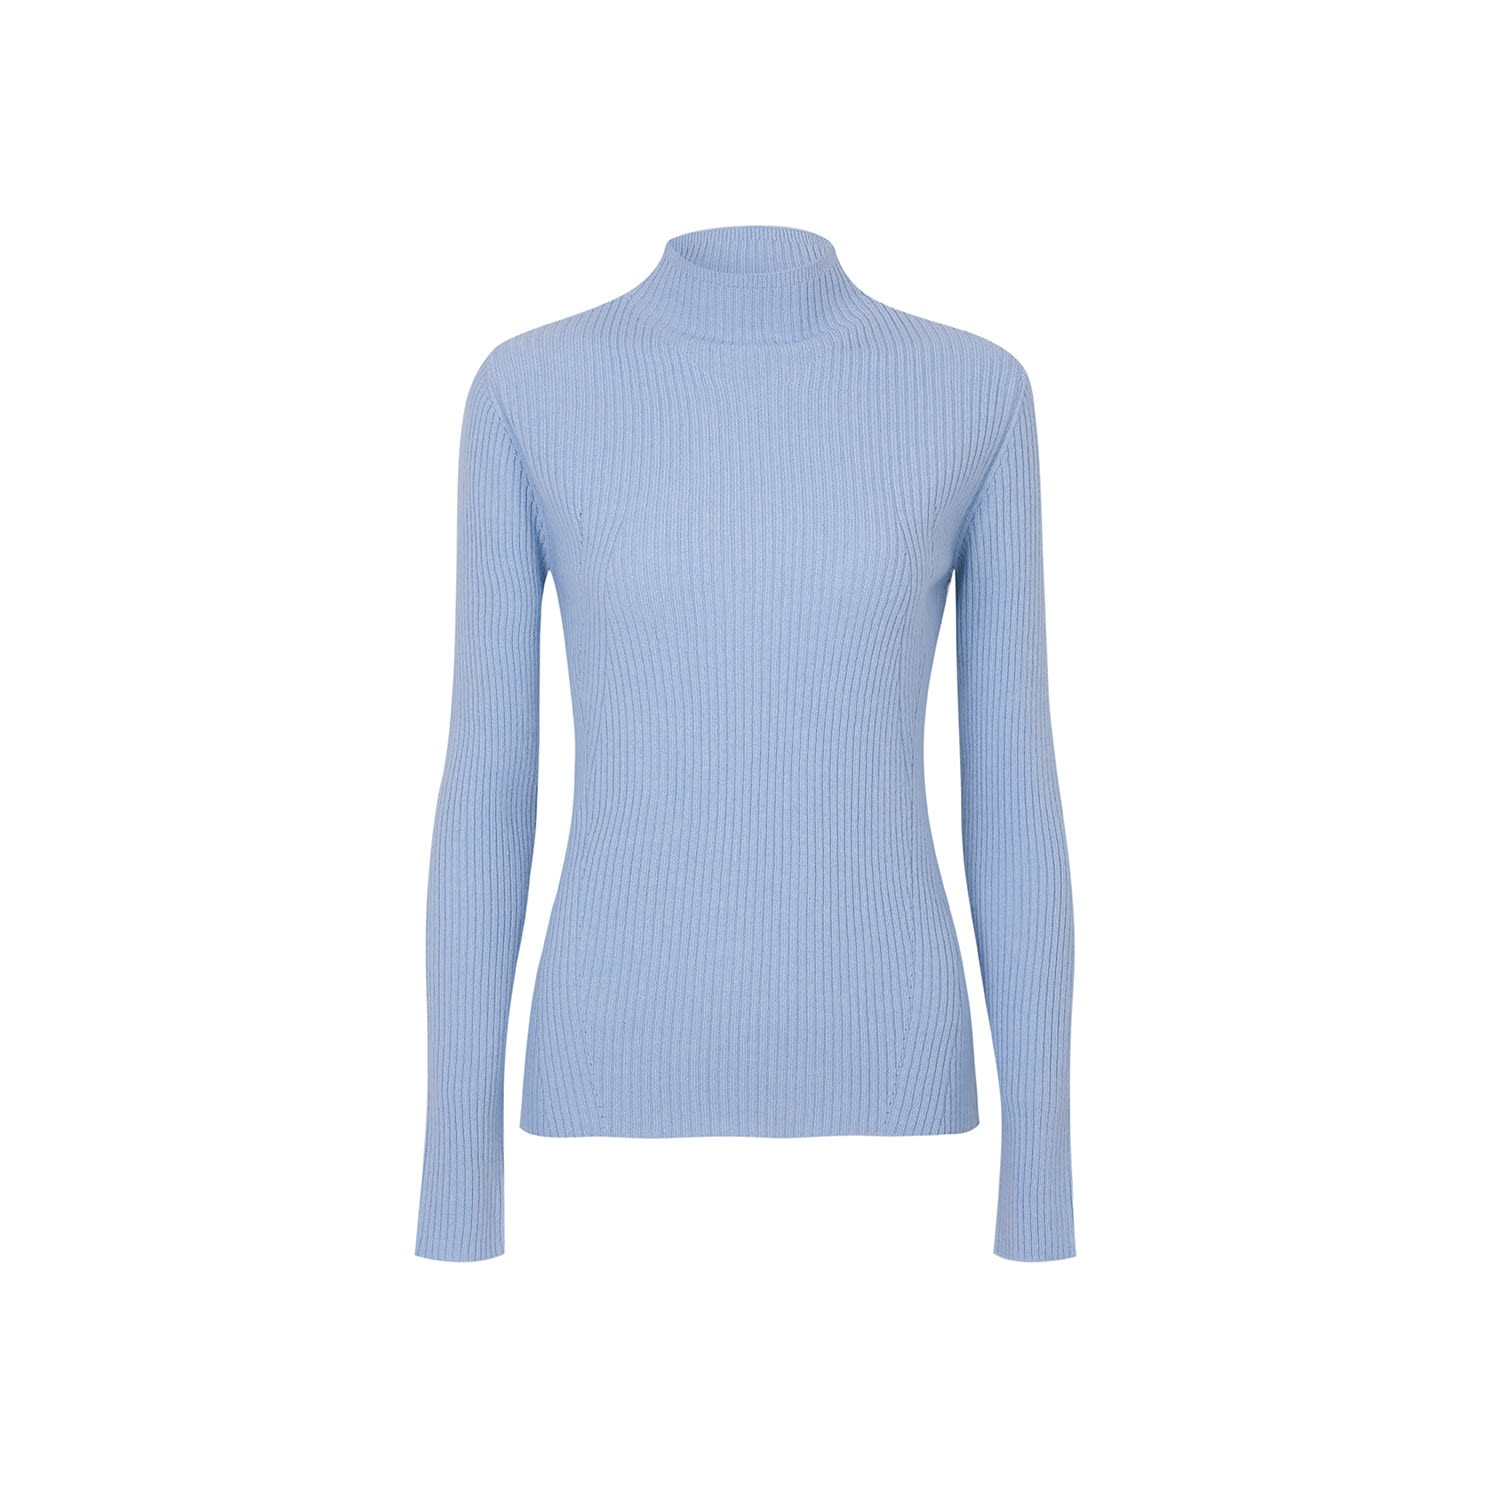 Women’s Slim Fit Ribbed Cashmere Turtleneck Sweater, Sky Blue Small Callaite